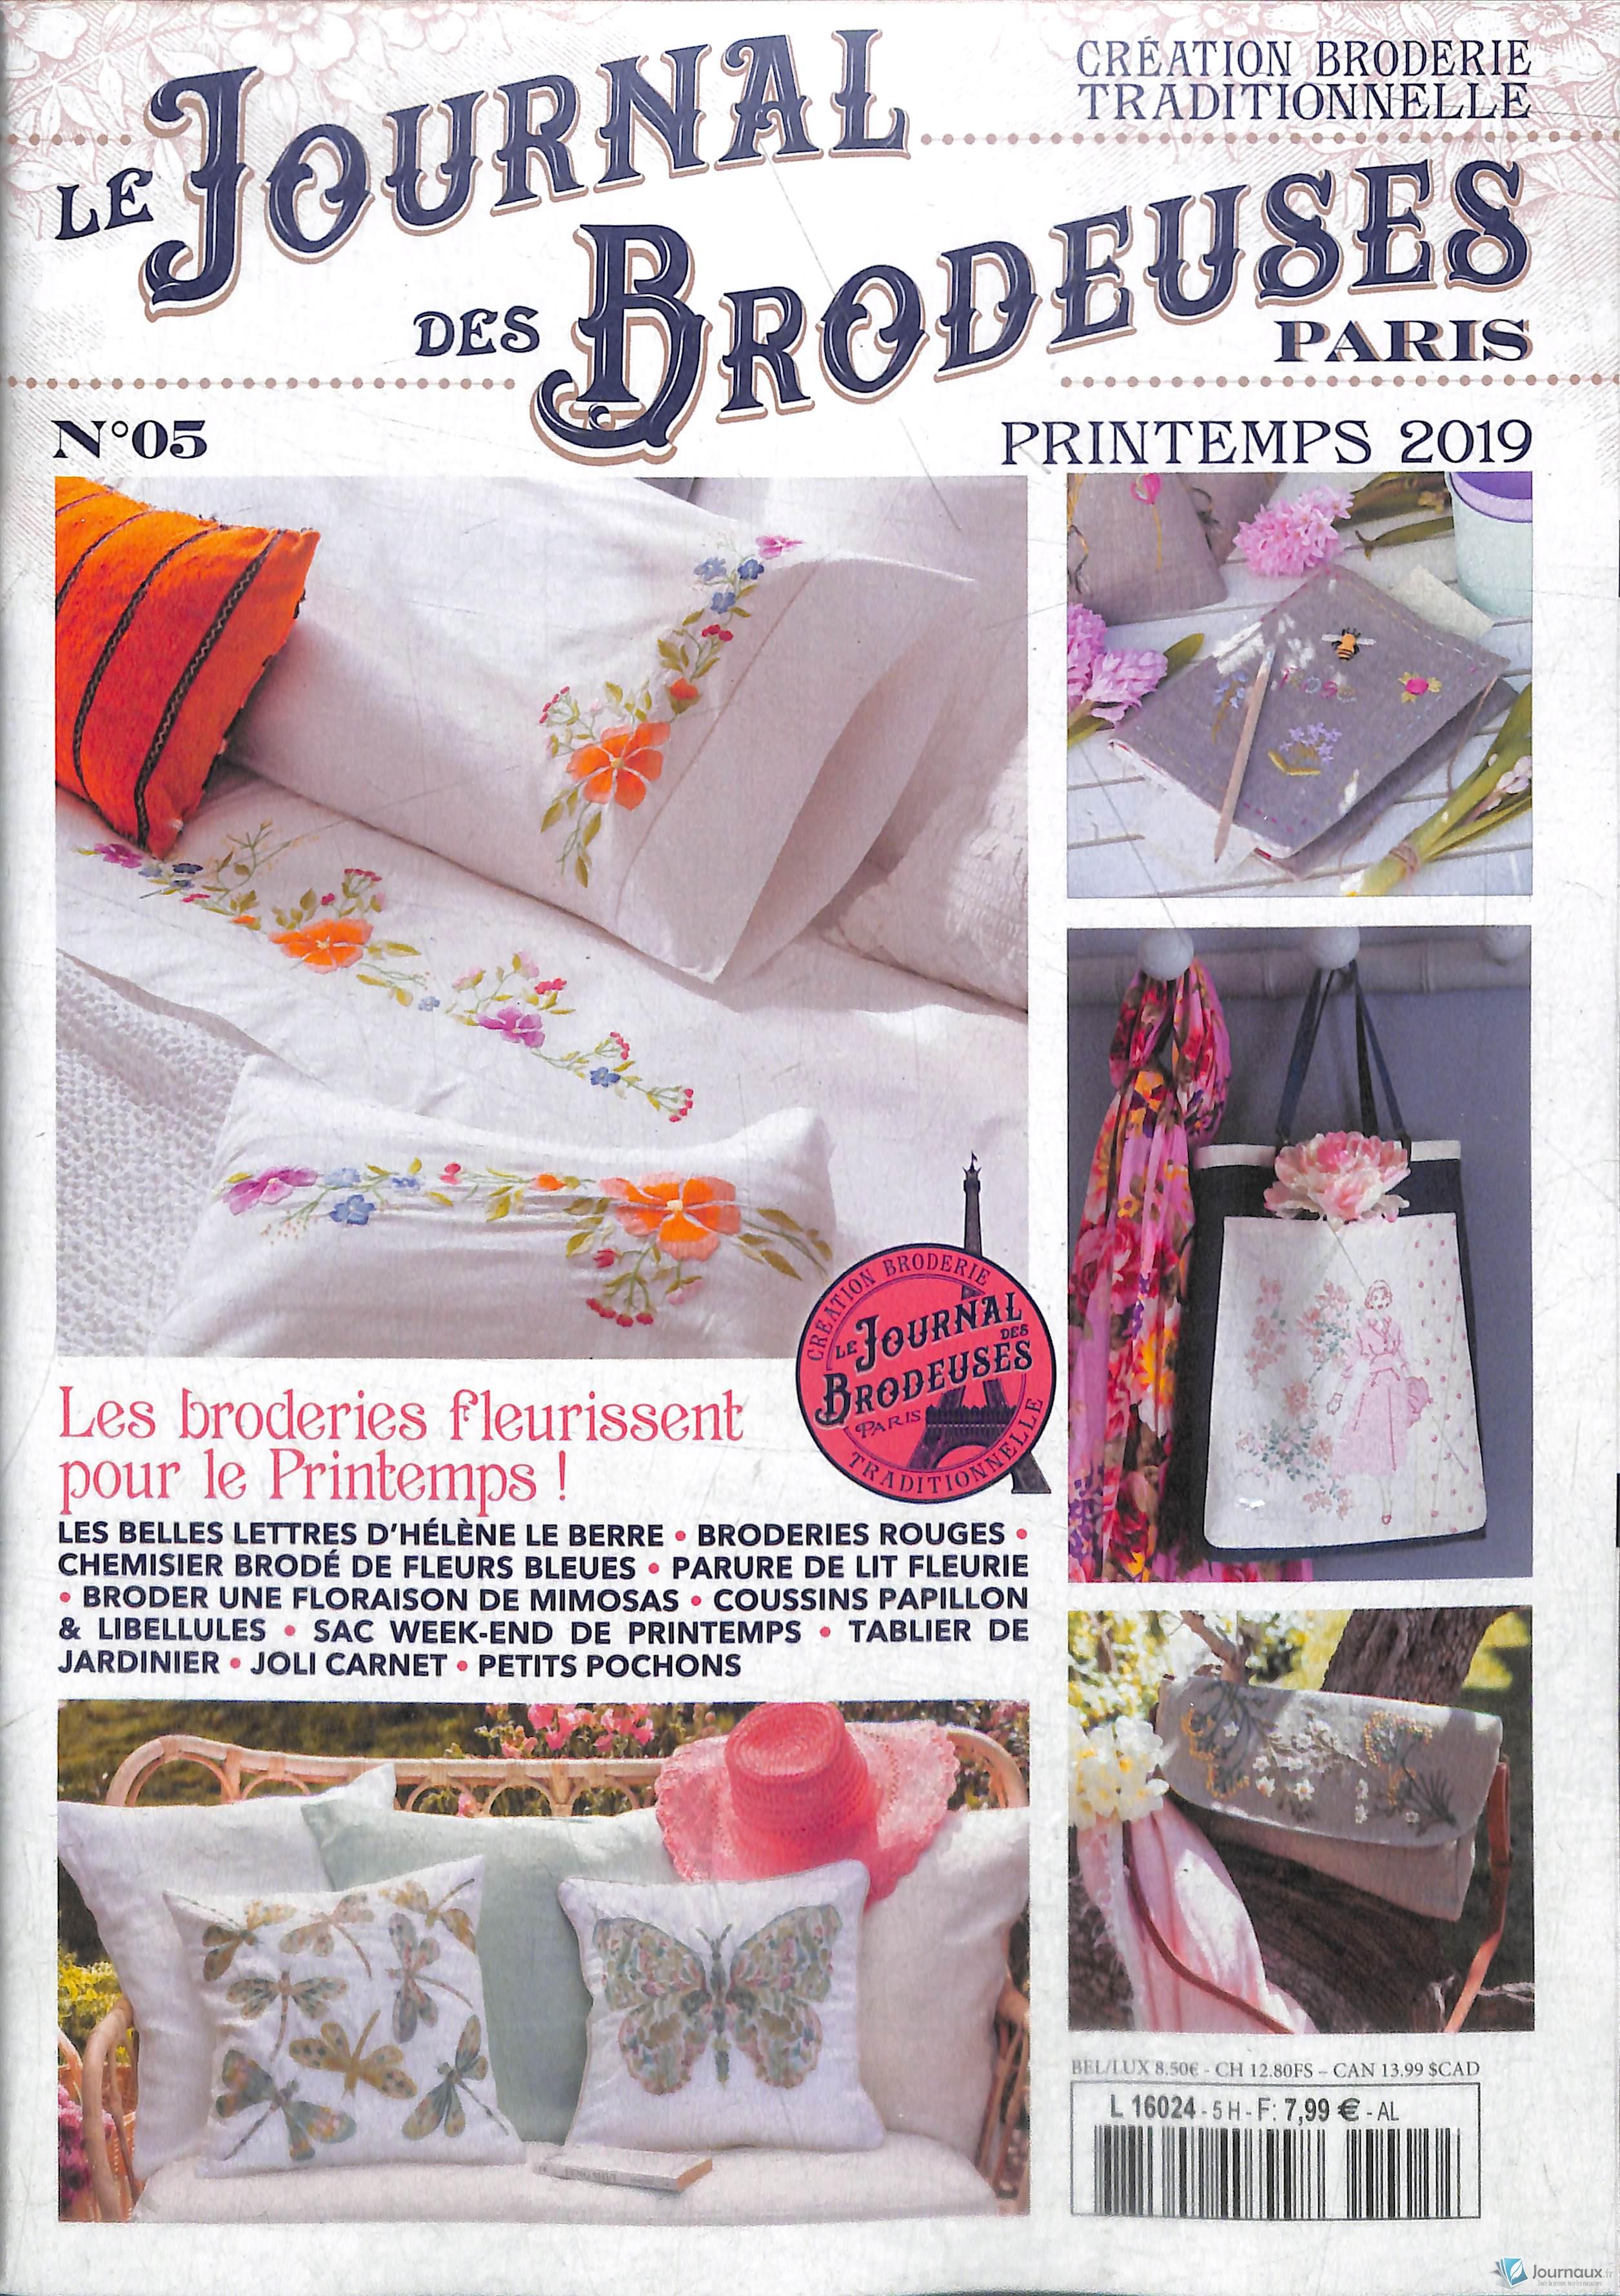 Magazine broderie traditionnelle